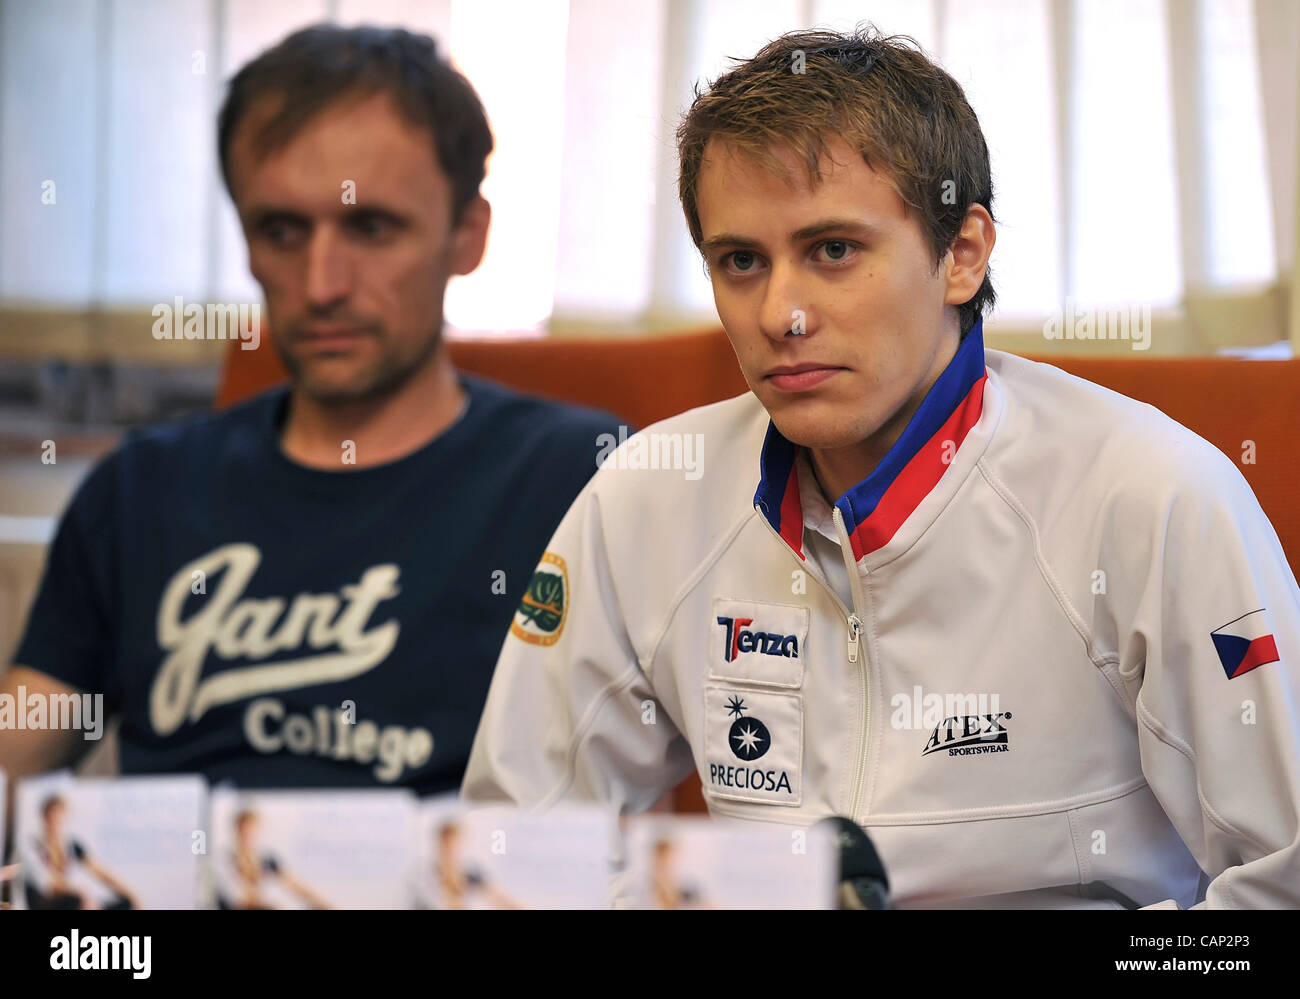 Czech figure skater Michal Brezina (right) and his father Rudolf speak during press conference in Prague, Czech Republic on April 3, 2012 after his arrival from the Ice skating World Cup. (CTK Photo/Igor Sefr) Stock Photo